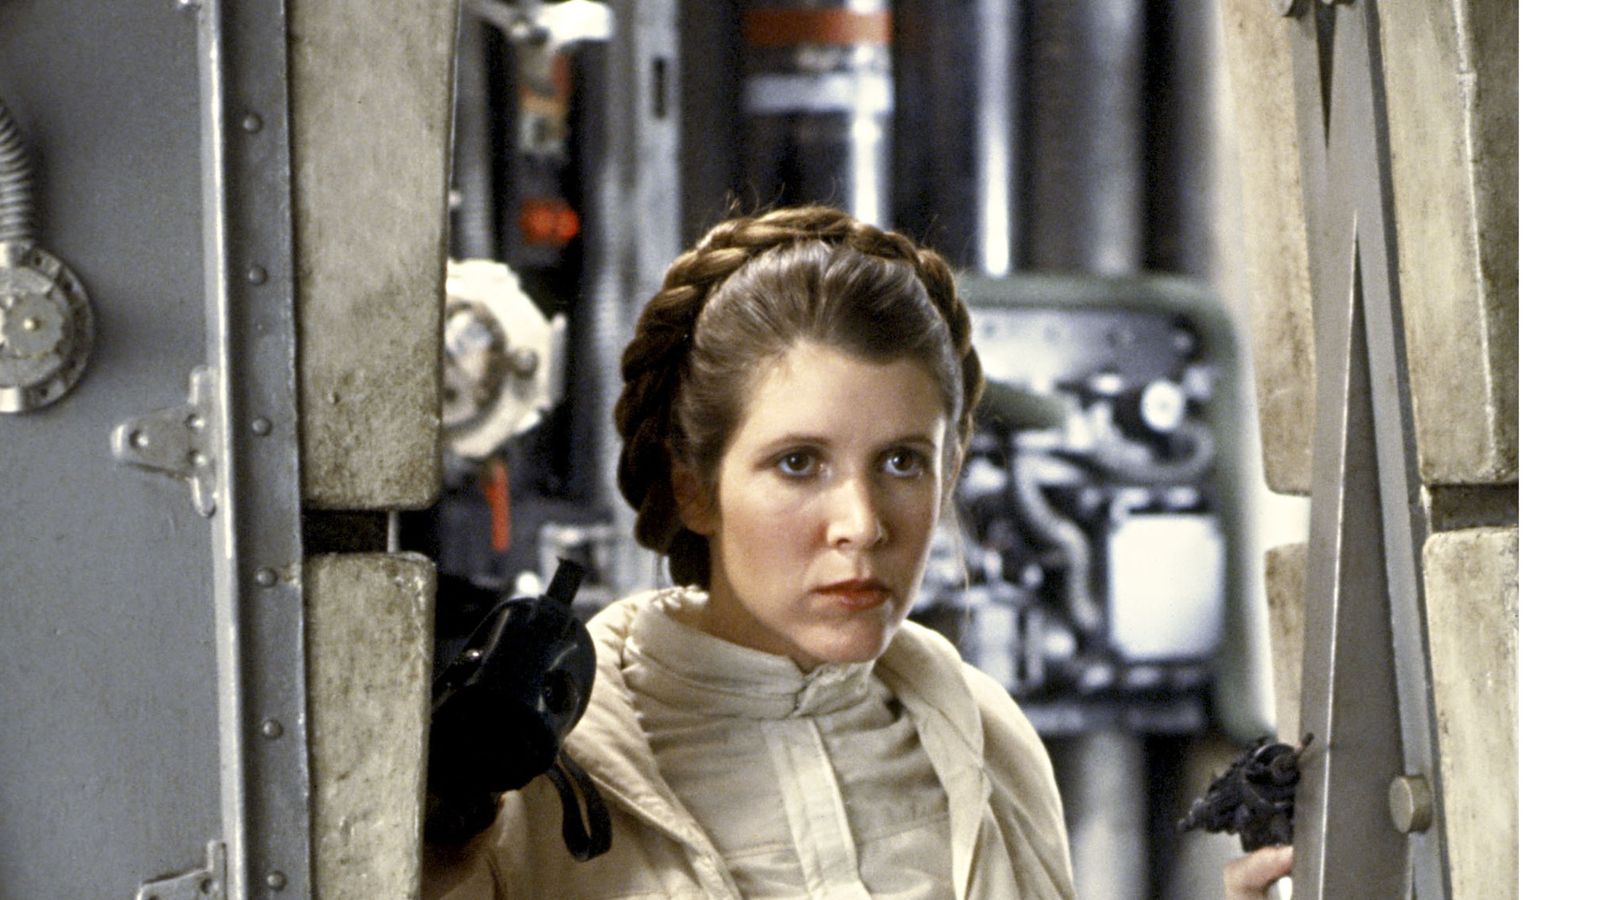 How Princess Leia Could Live On In The Star Wars Franchise Through Cgi 